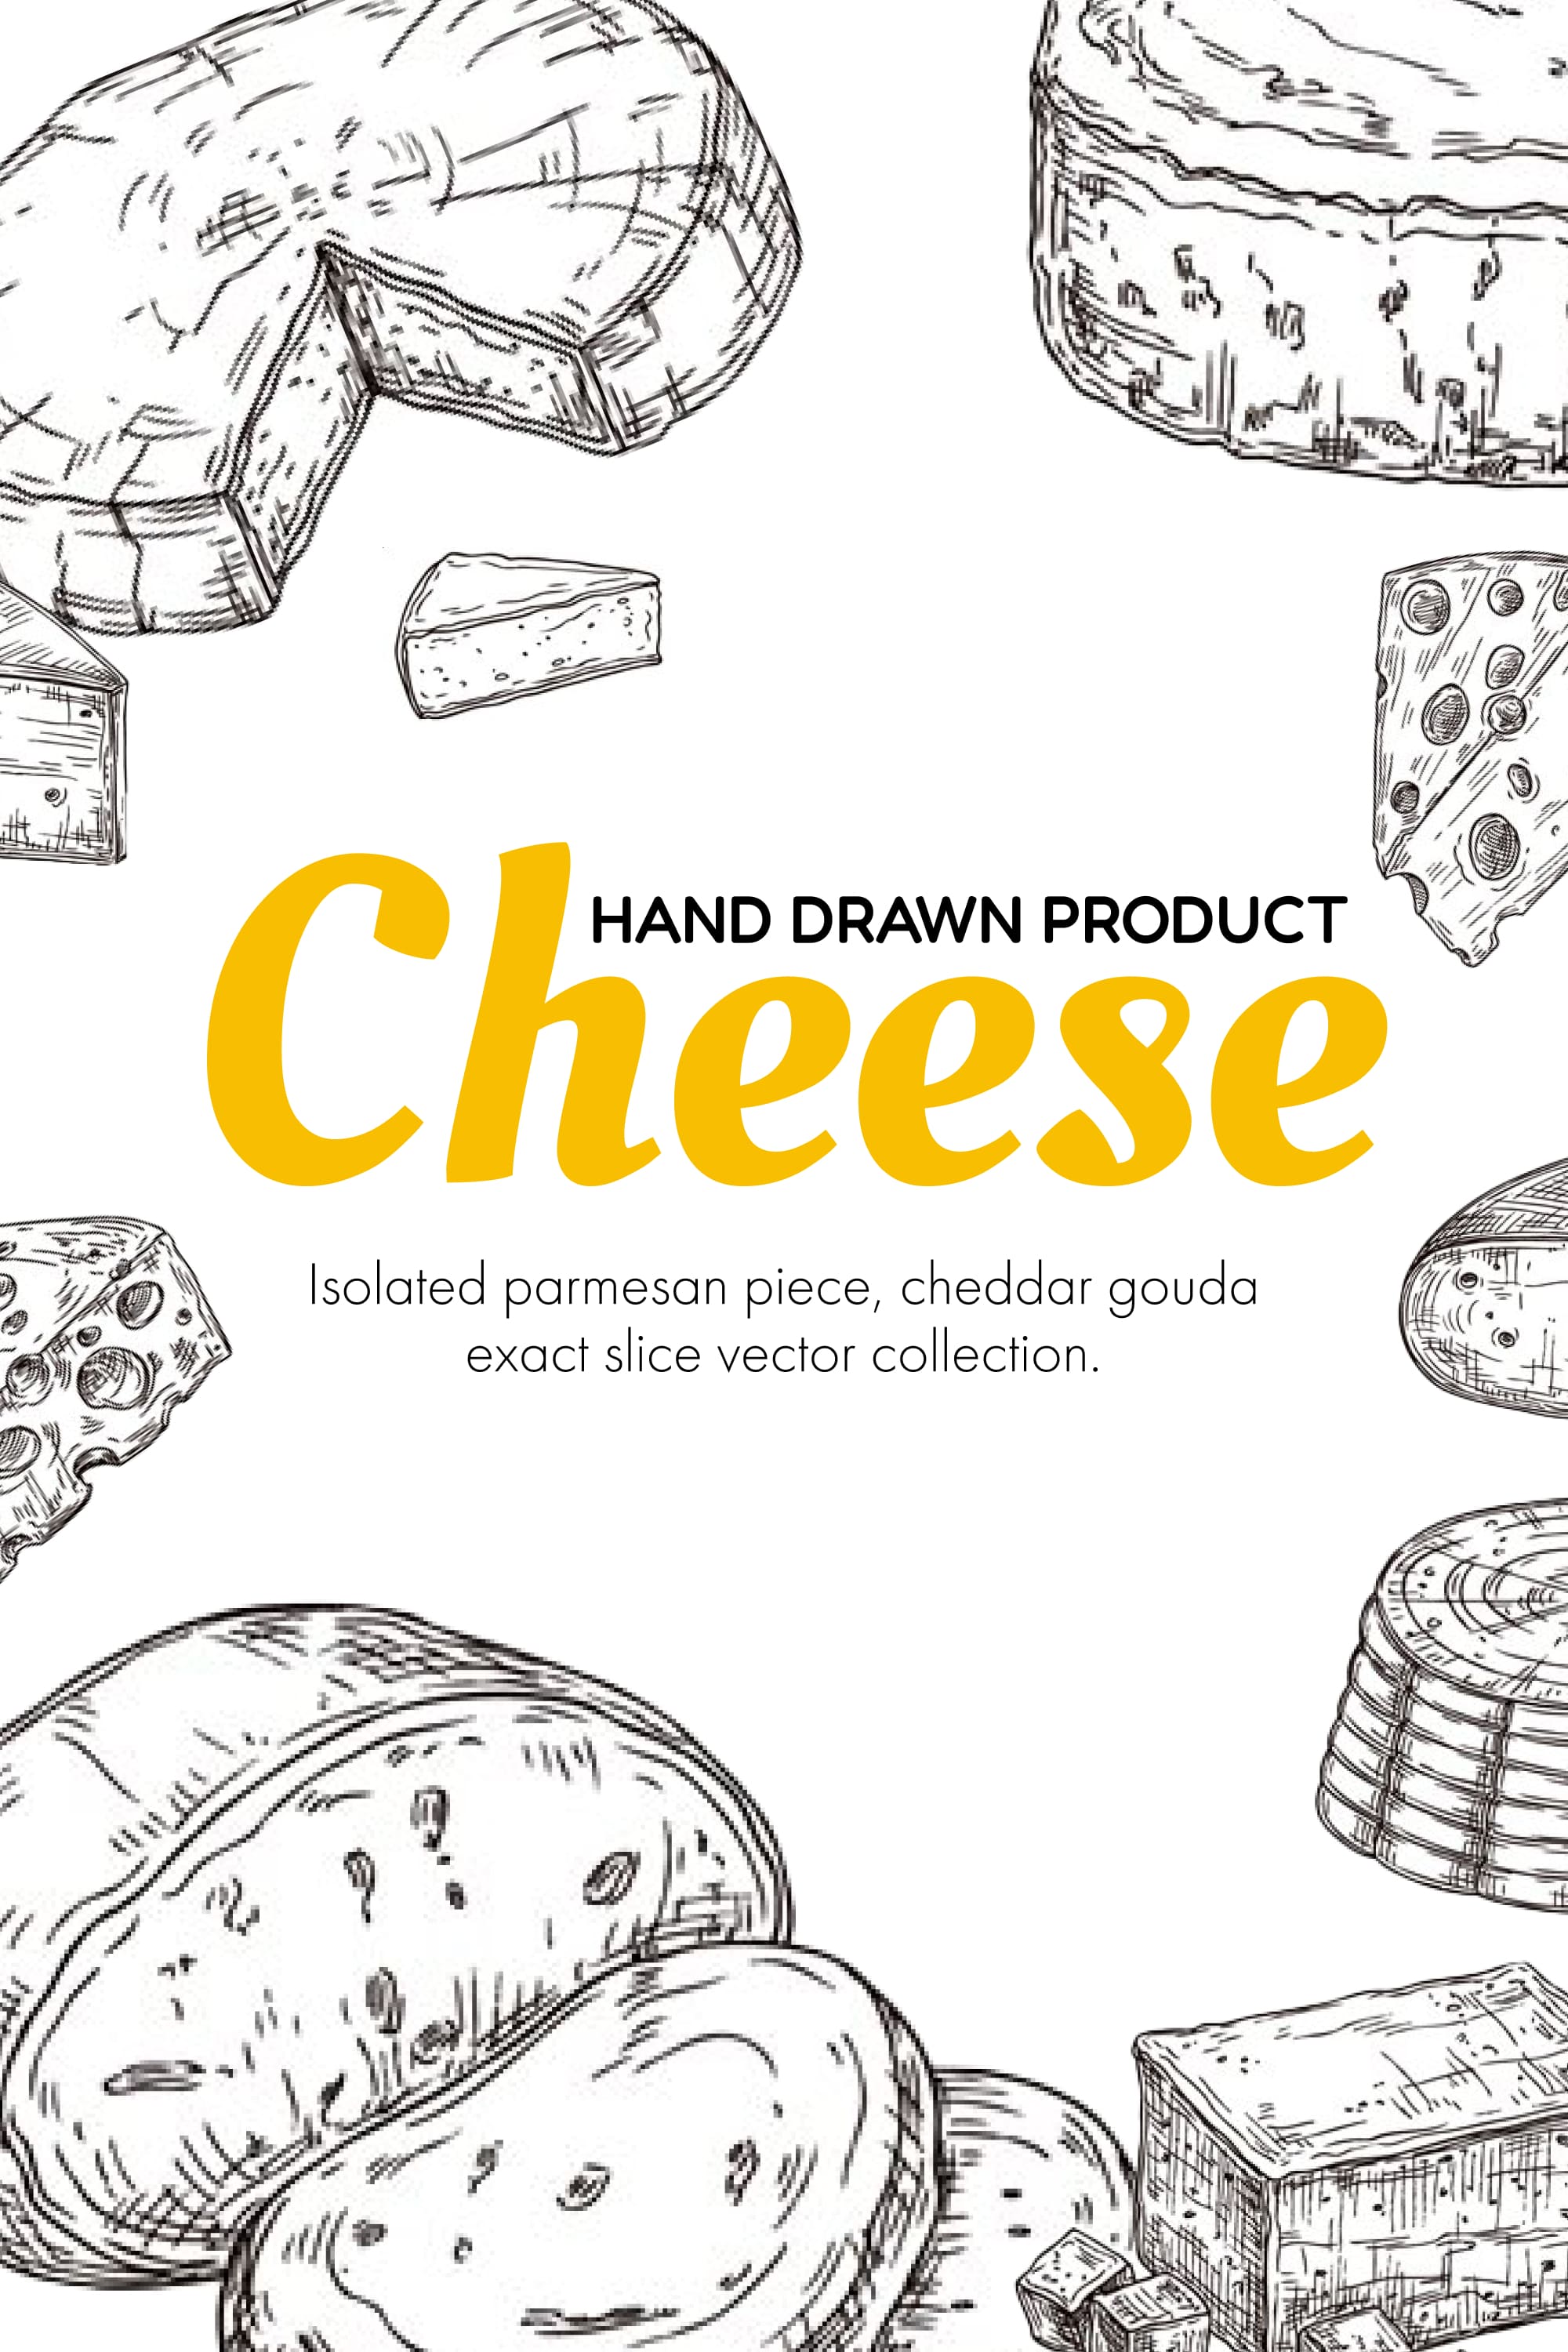 Gorgeous hand drawn sketches of holland cheeses.